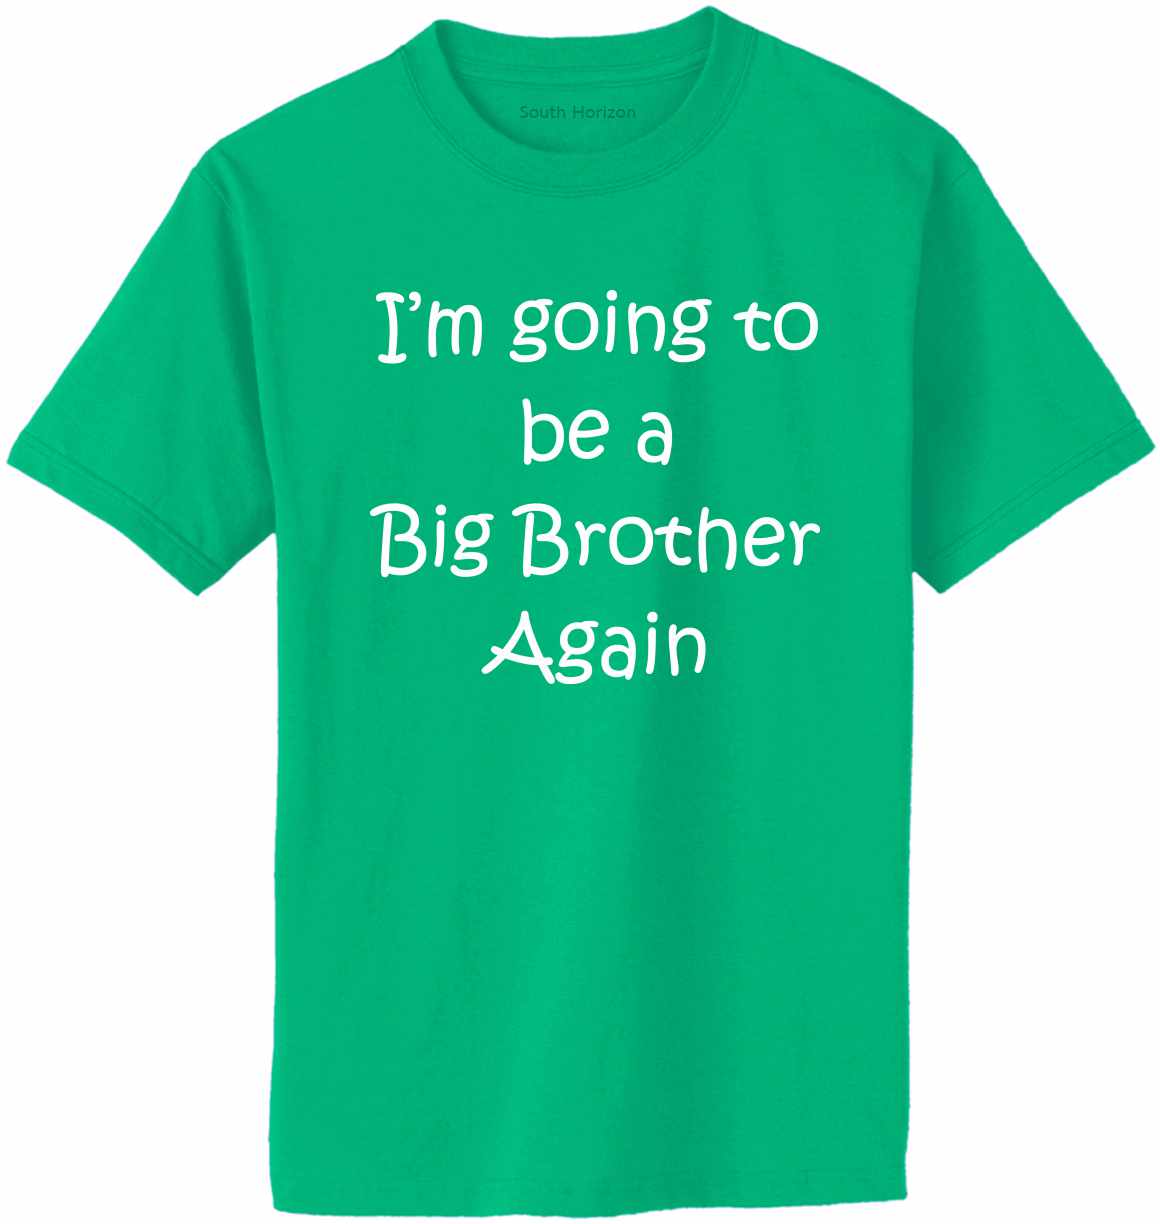 I'm Going to be a Big Brother Again Adult T-Shirt (#813-1)